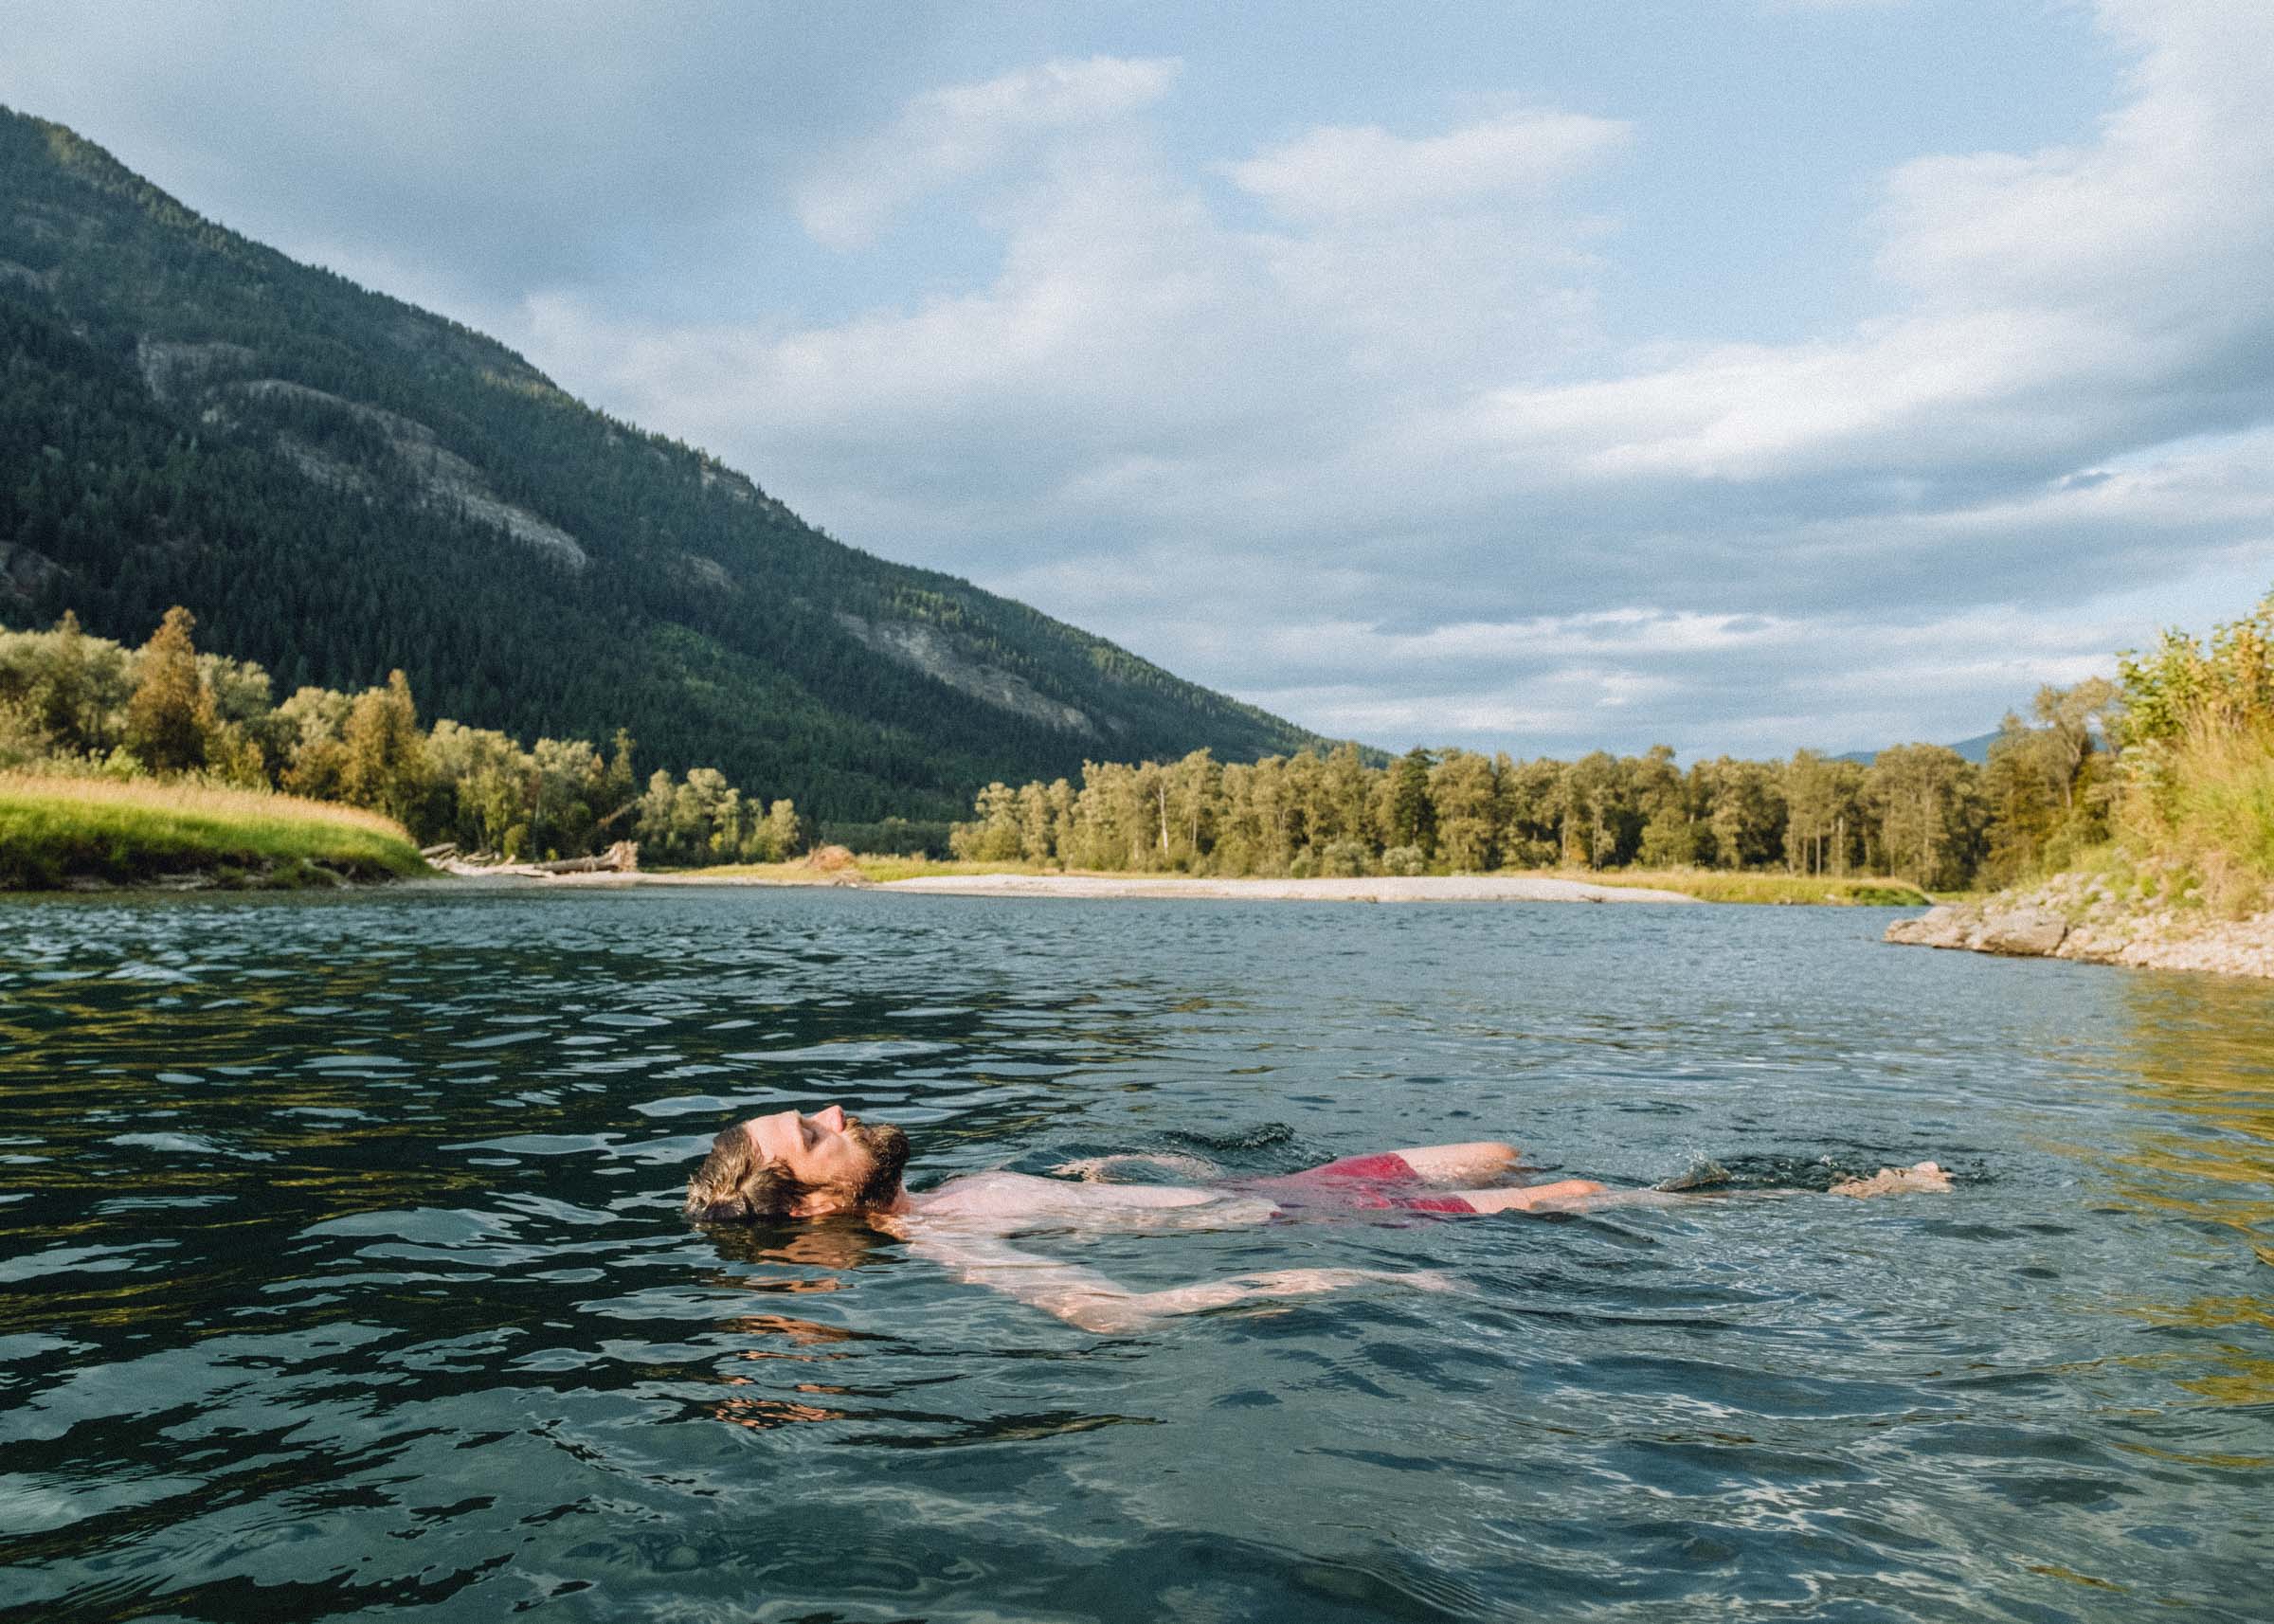 Summer swims in the pastoral in the Slocan River